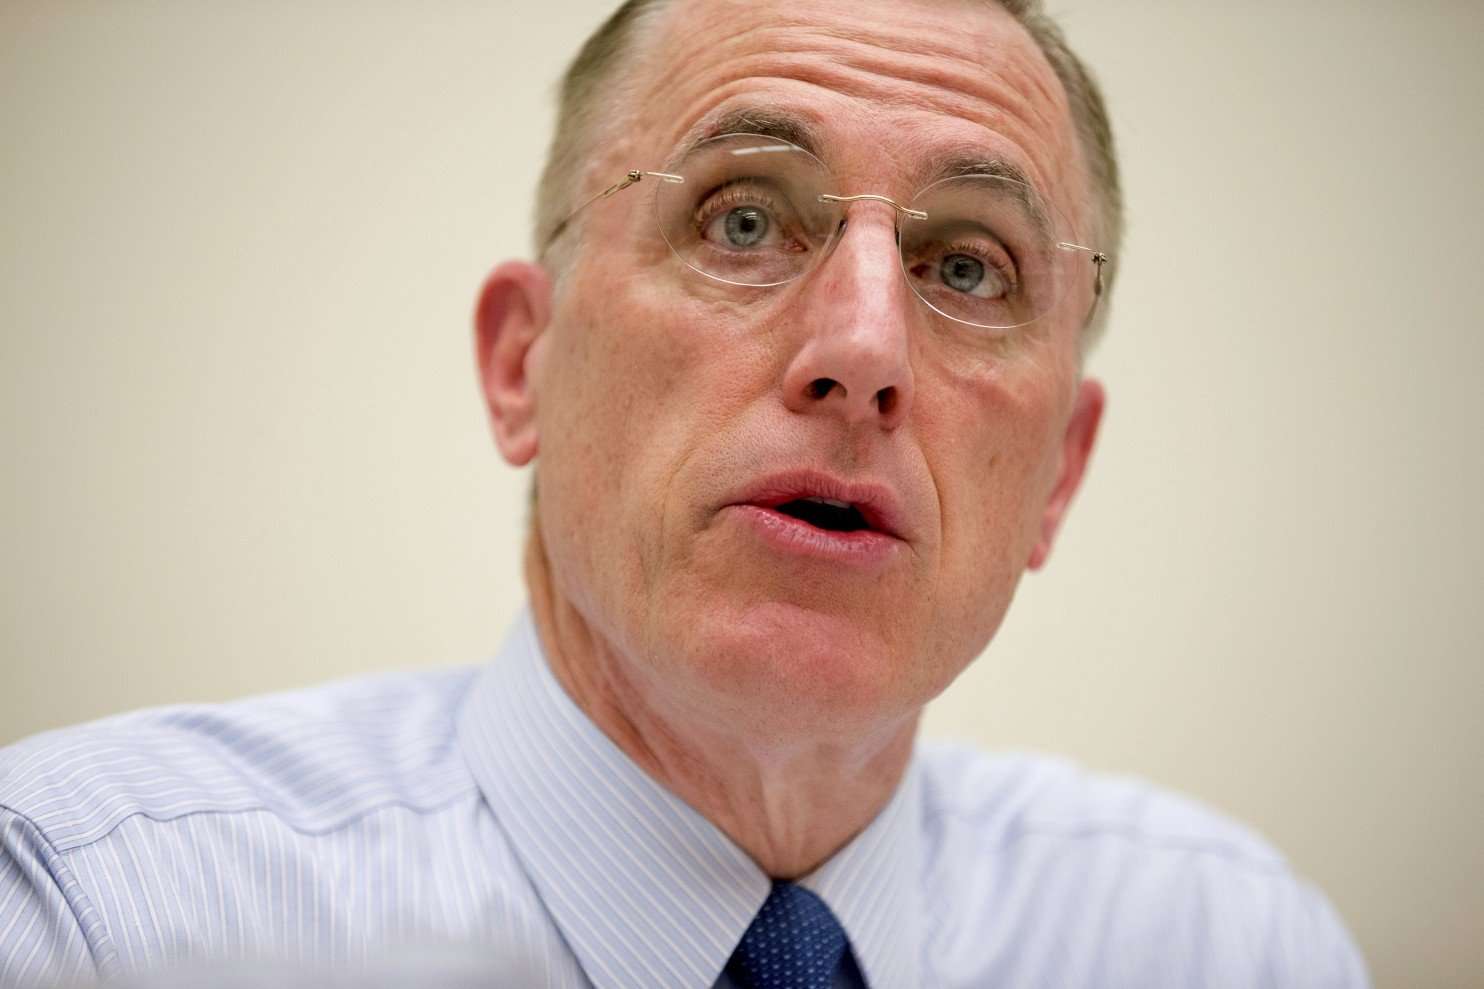 image for Rep. Tim Murphy resigns from Congress after allegedly asking woman to have abortion